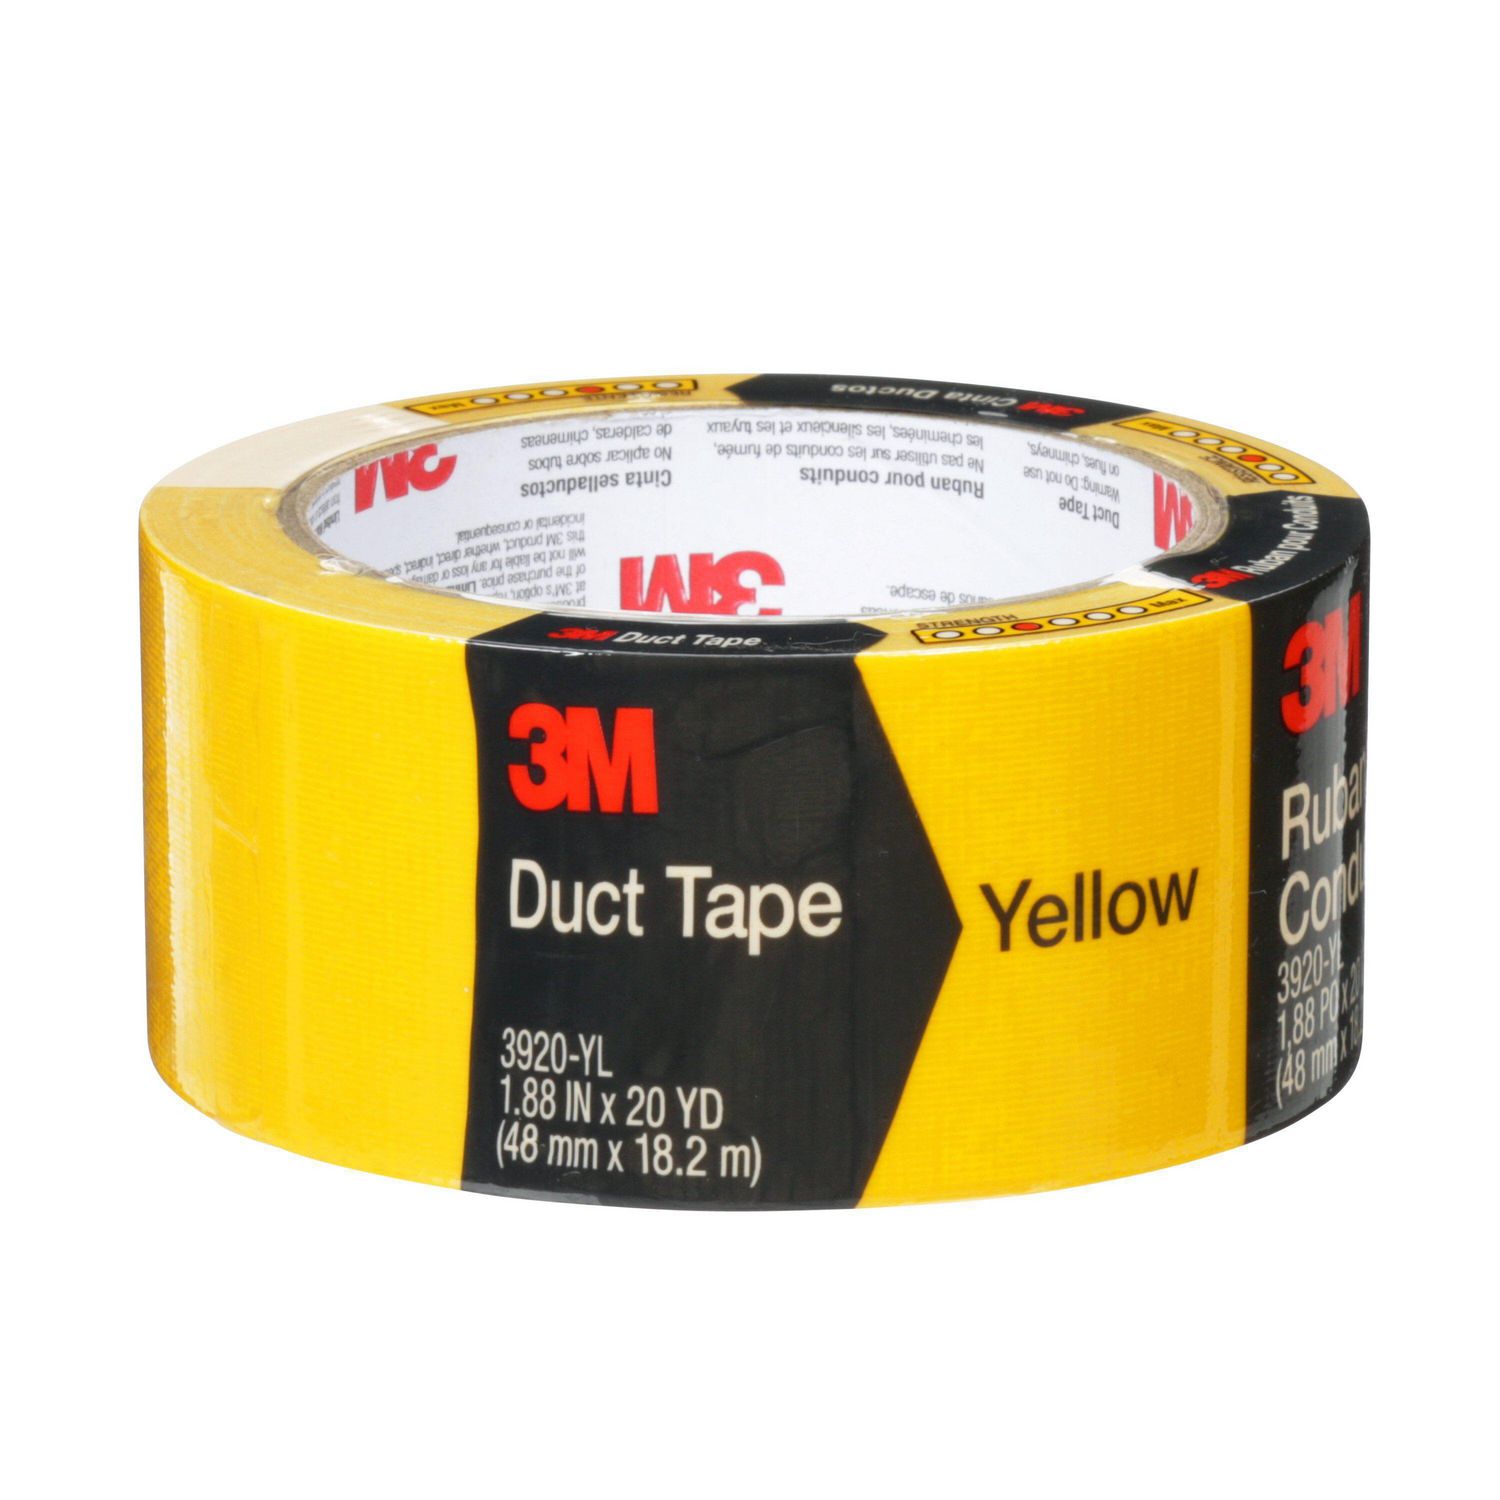 3M Multi-Purpose Duct Tape Yellow 3920-YL 1.88 Inches by 20 Yards 